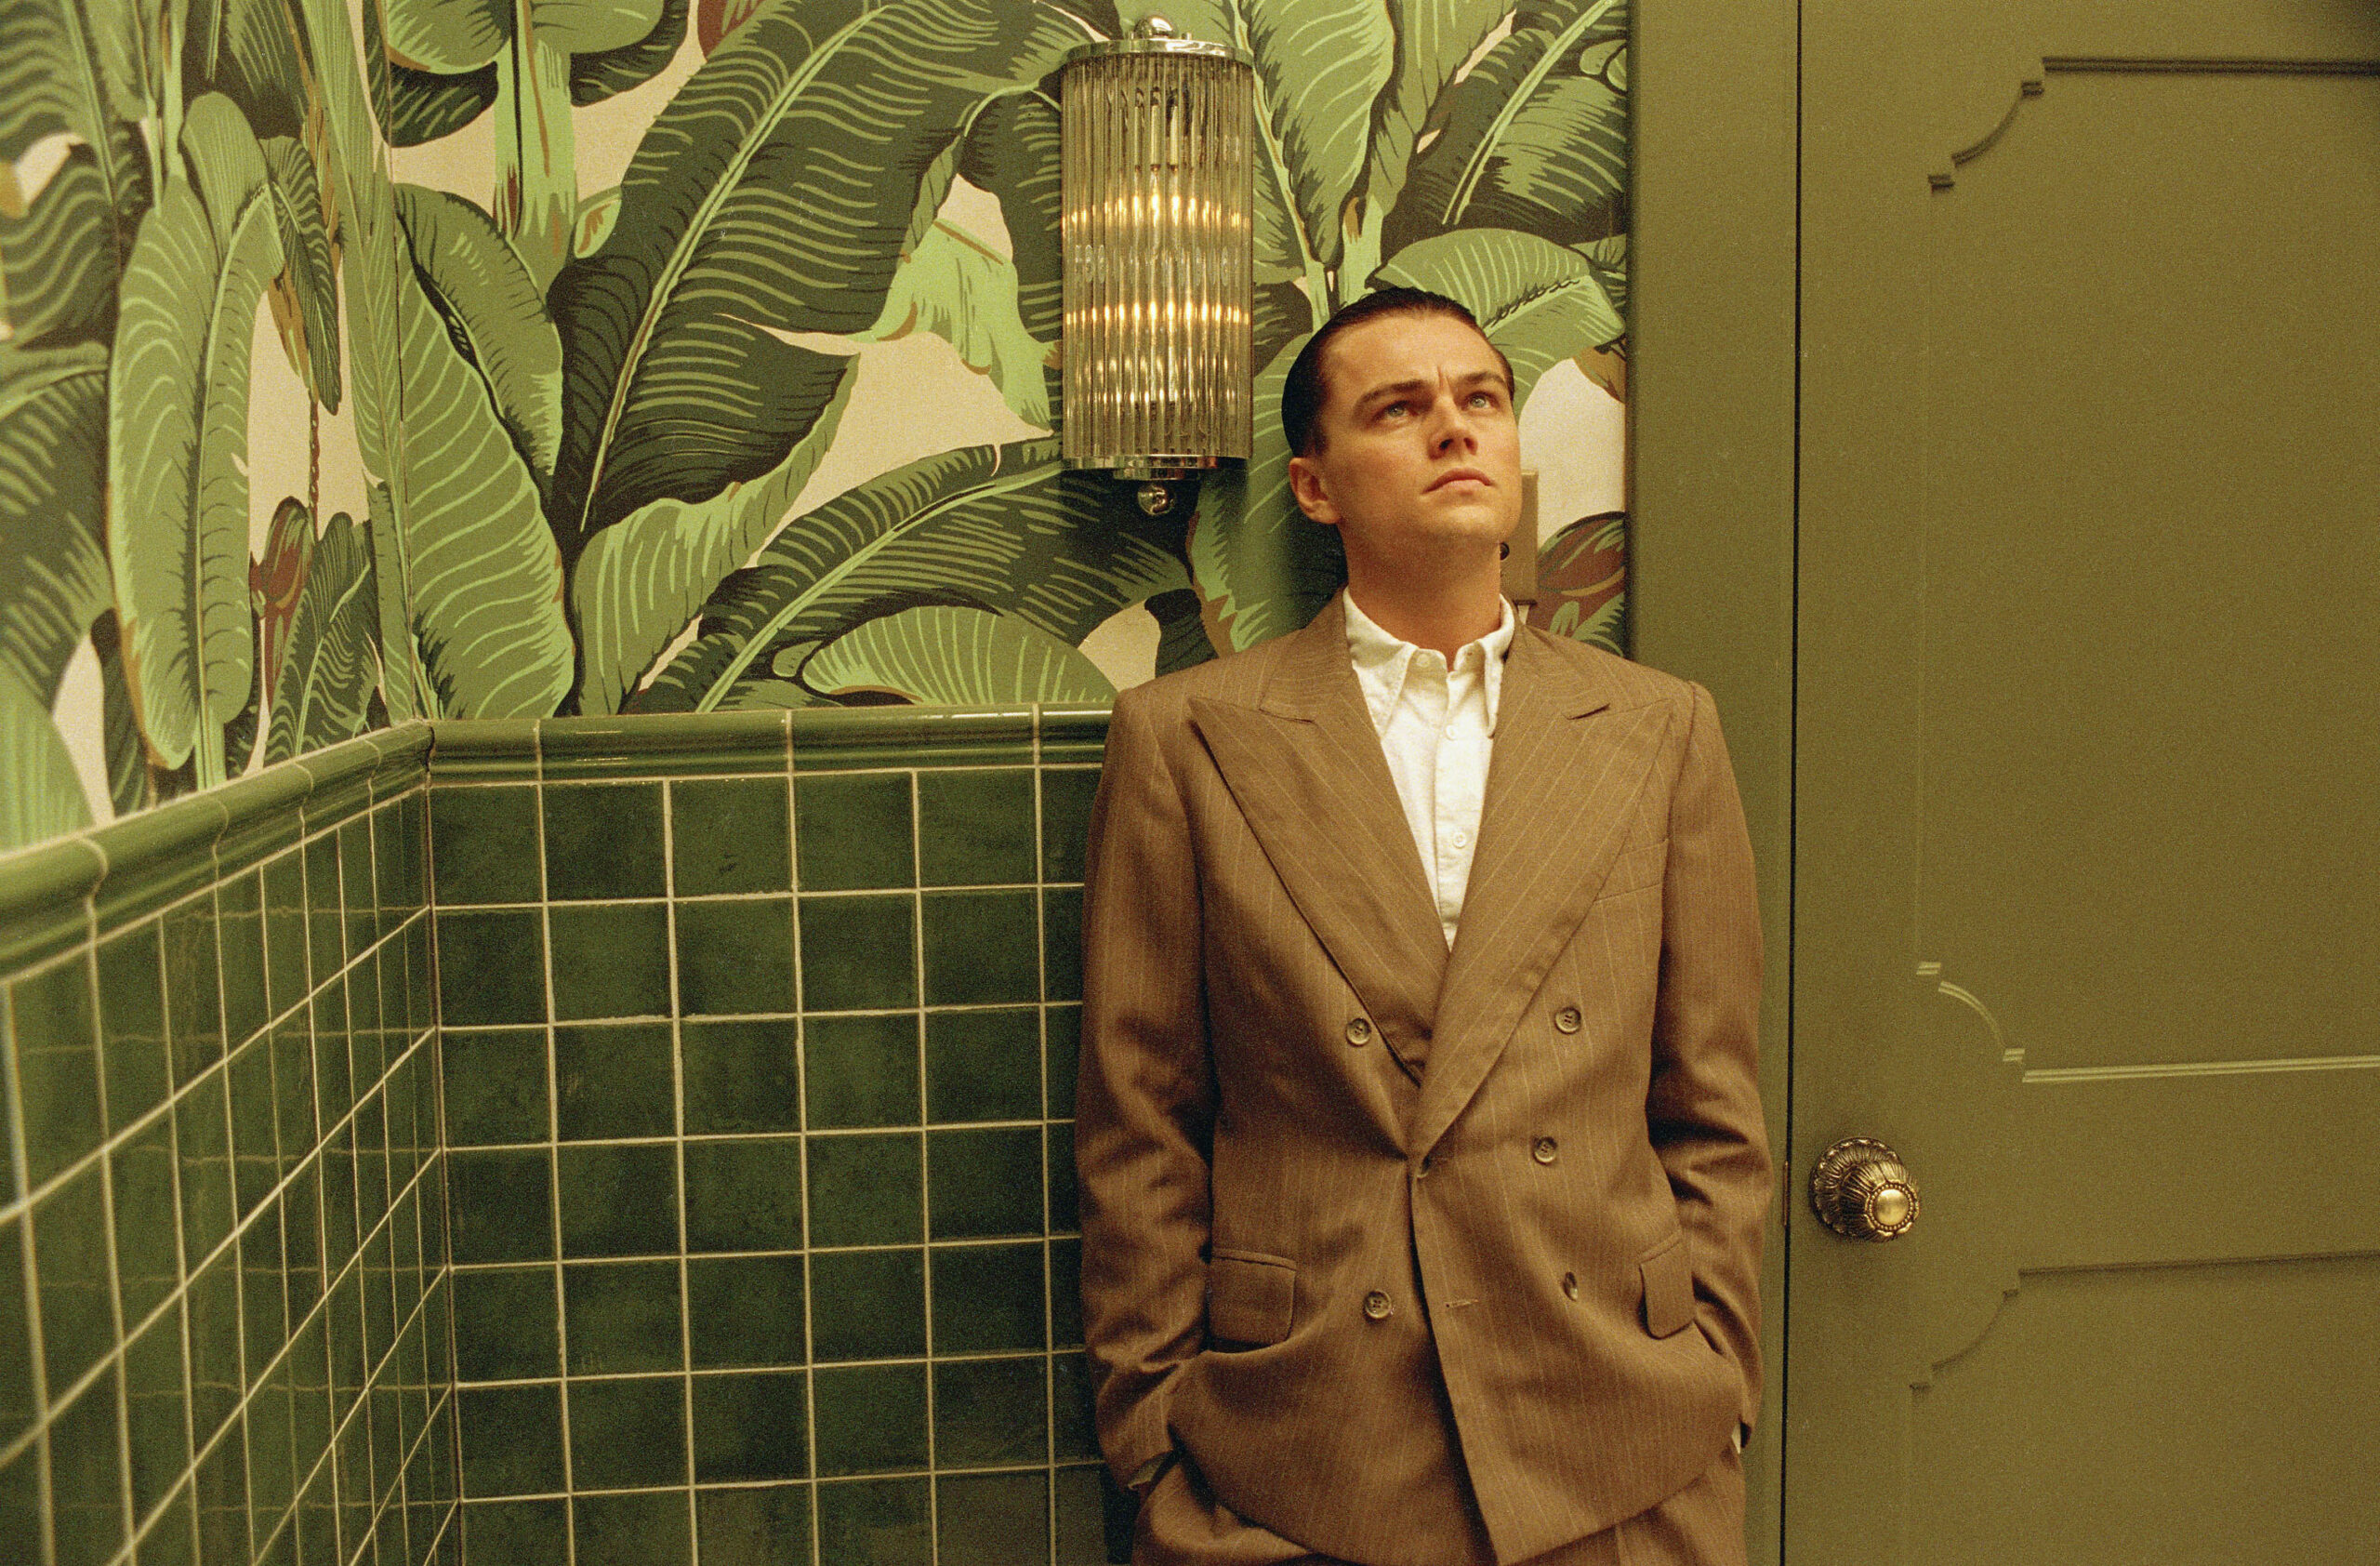 THE AVIATOR - Directed by Martin Scorsese - Int. Lavatory, Stage Set - ©2004 - Miramax Films